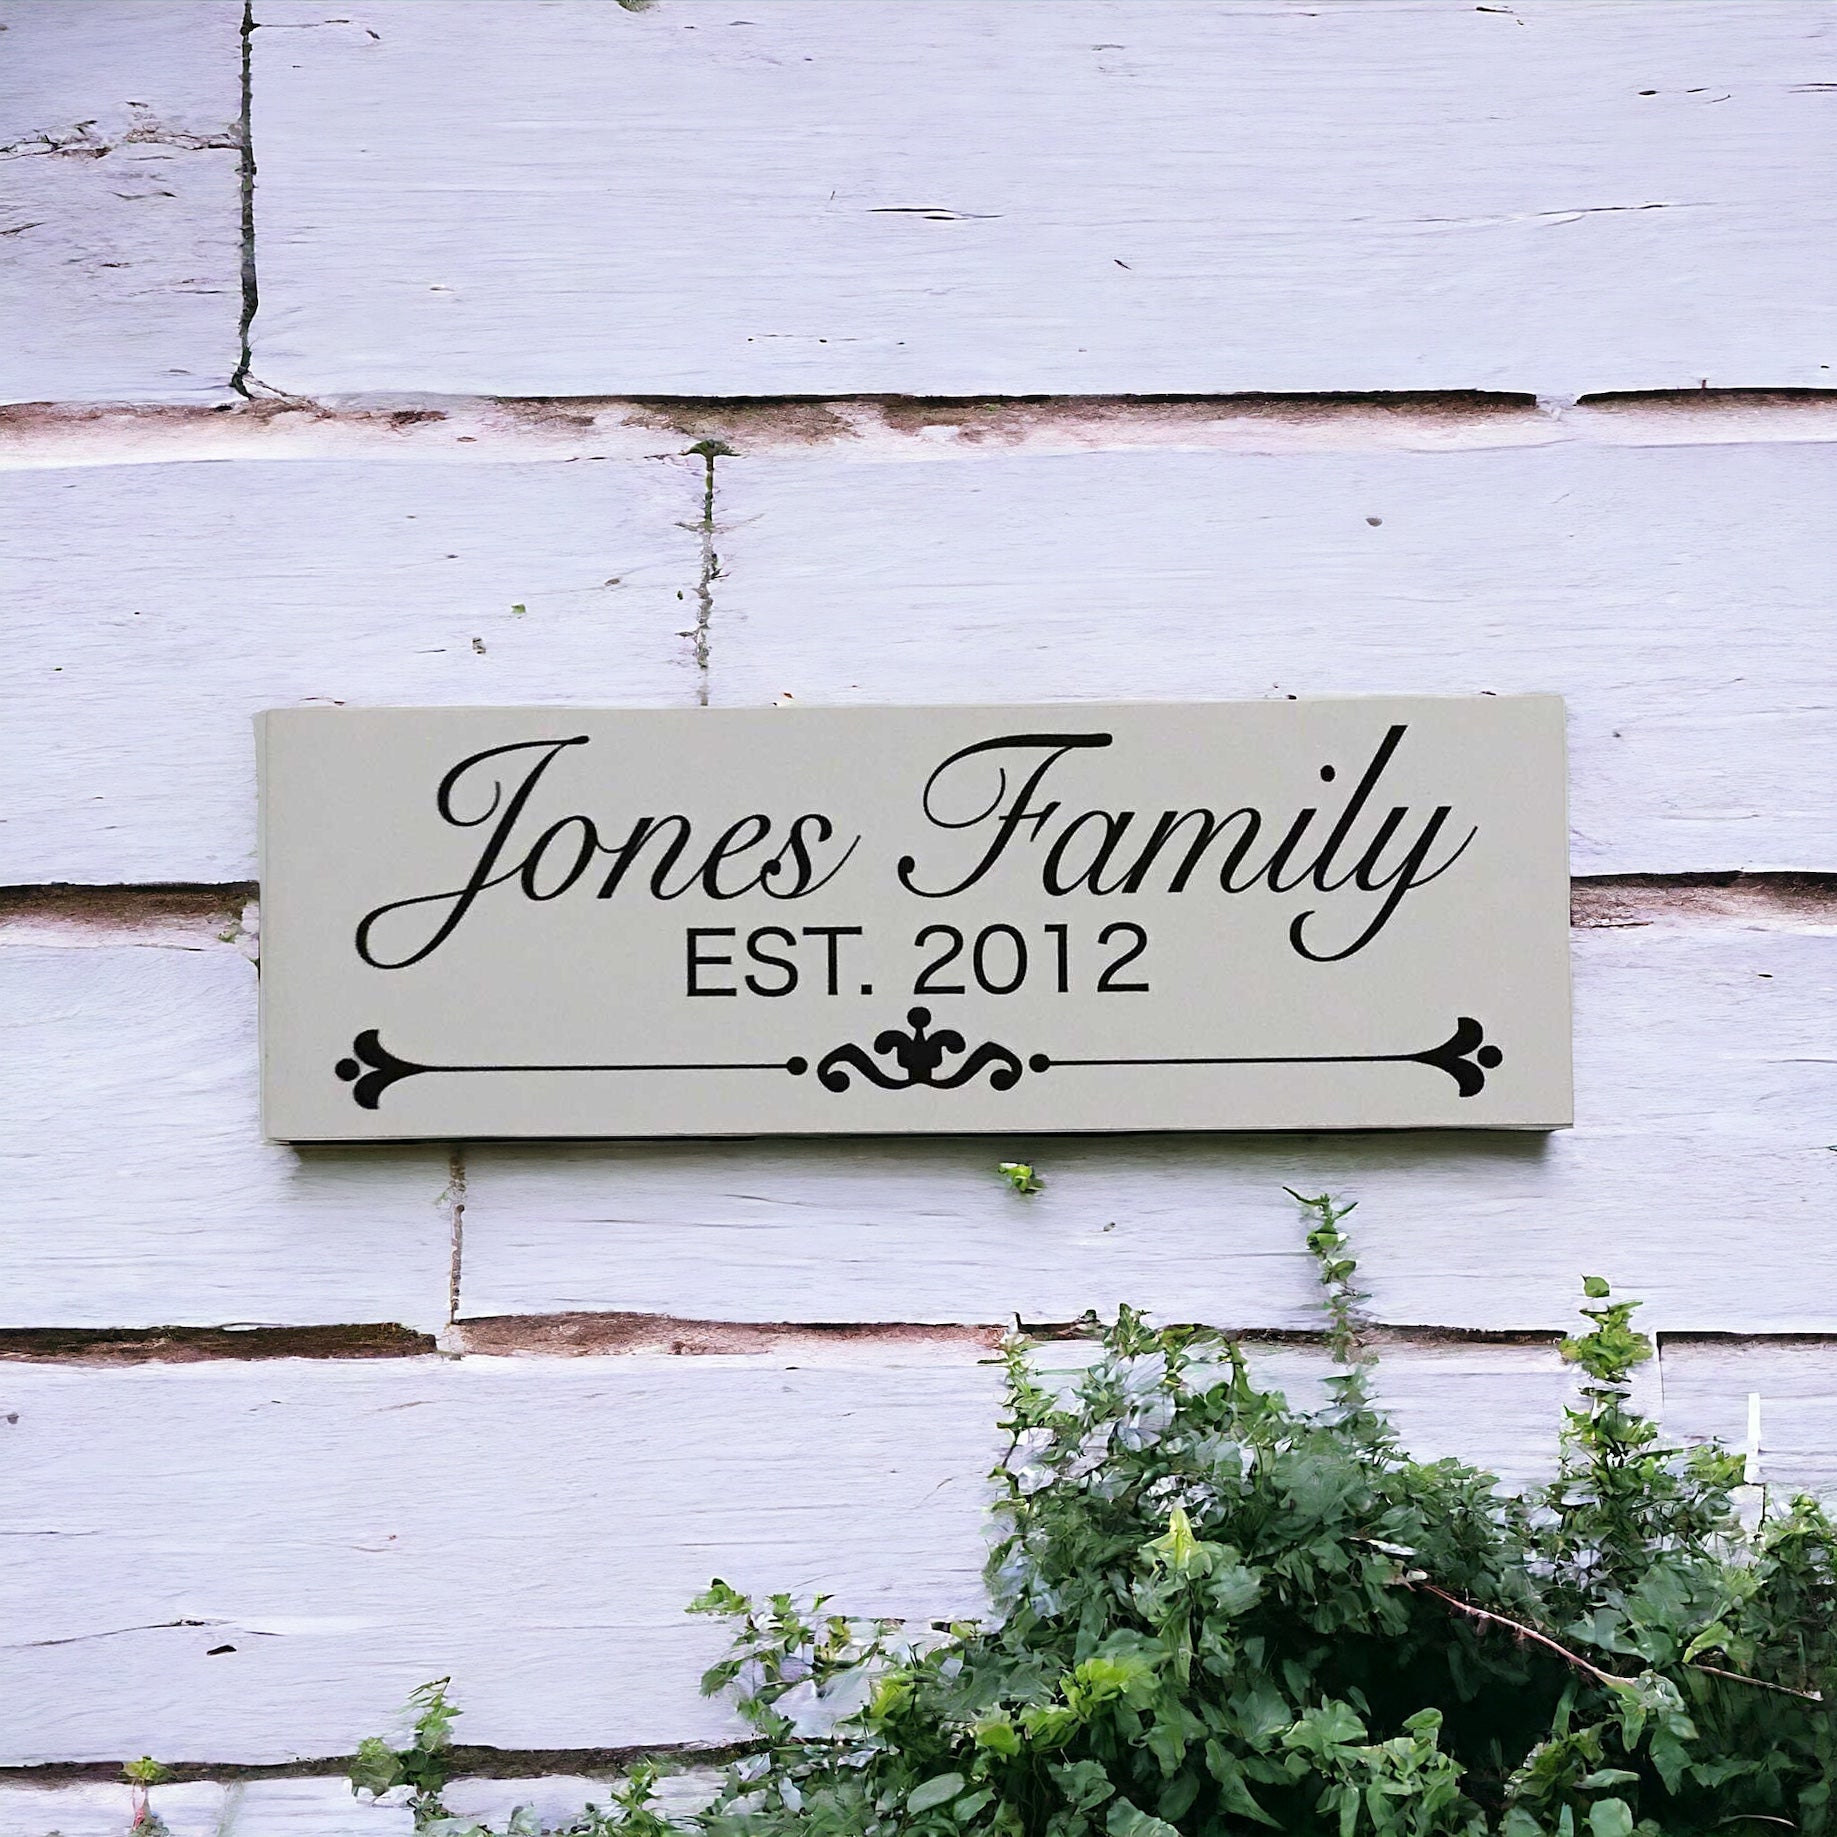 Family Name Custom Personalised White Sign - The Renmy Store Homewares & Gifts 